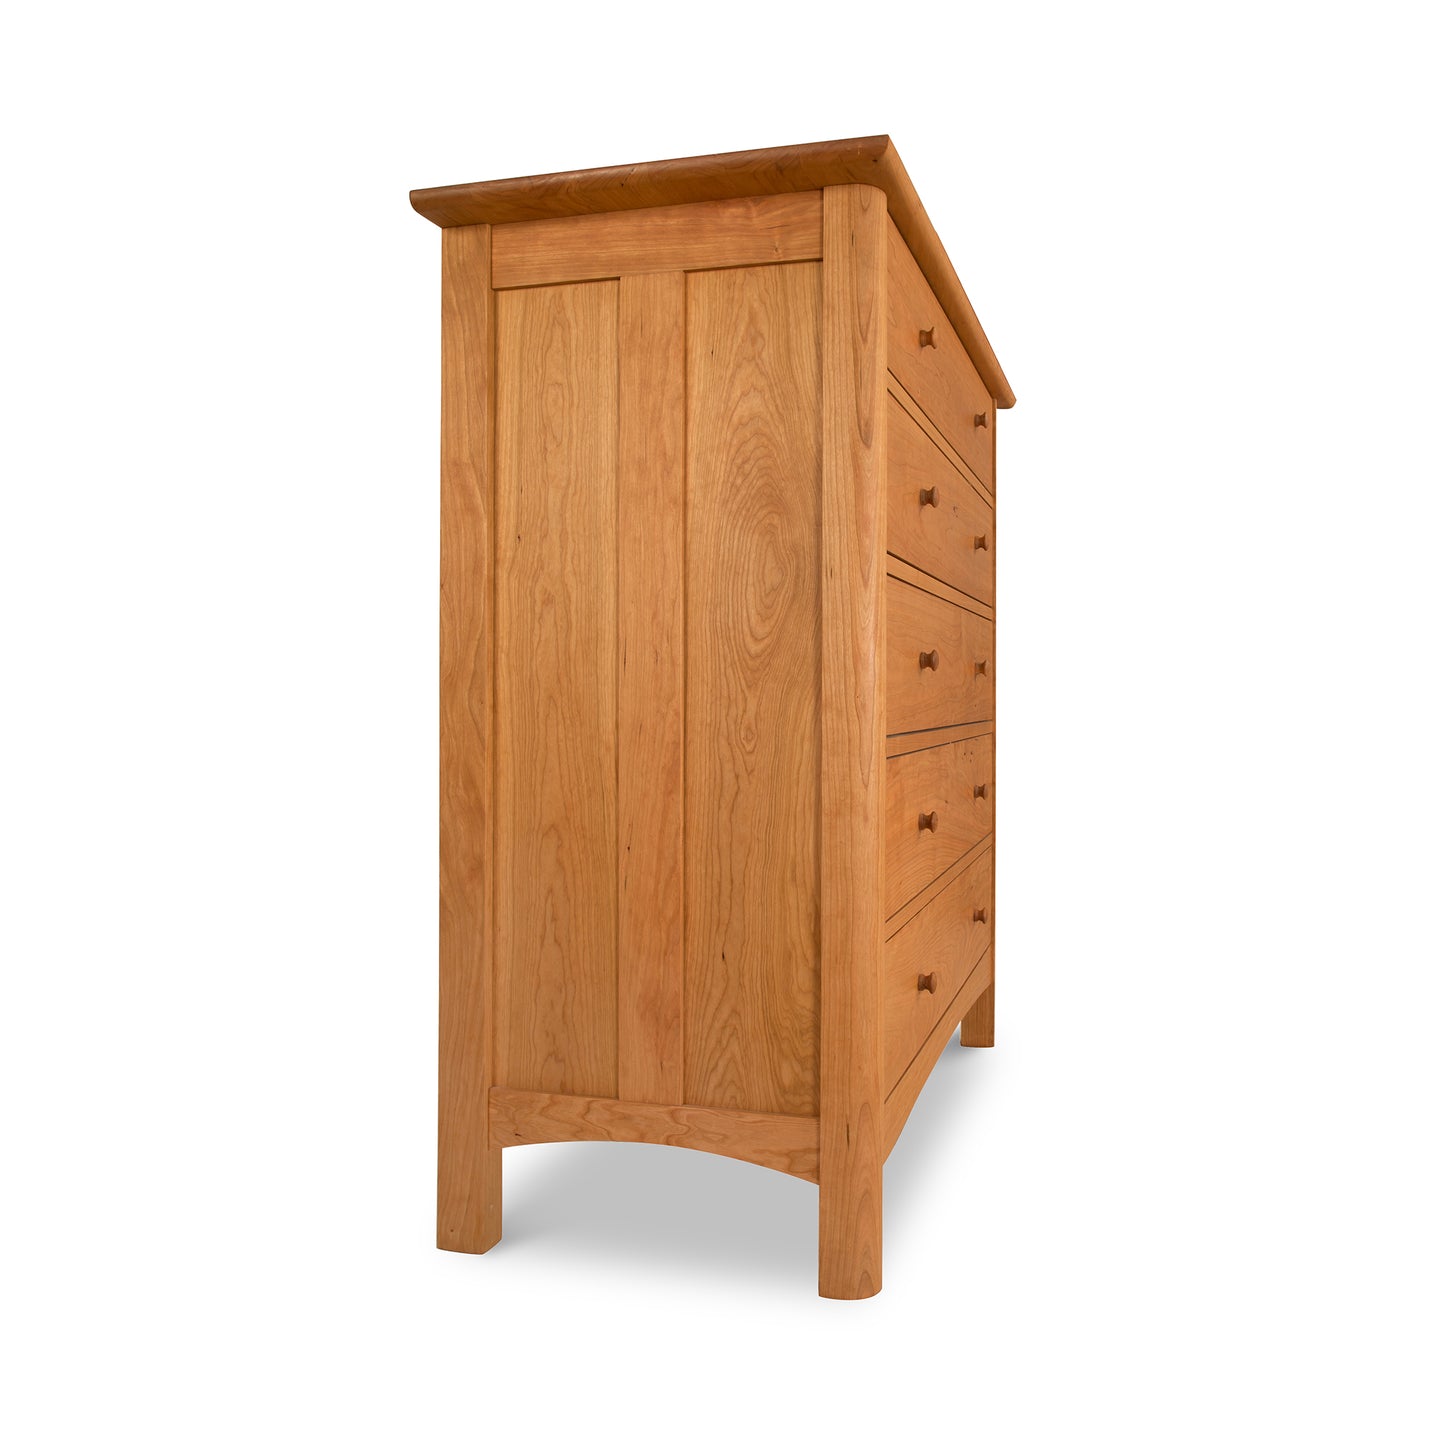 A Vermont Furniture Designs Heartwood Shaker 5-Drawer Chest, made of heartwood shaker, set against a white background.